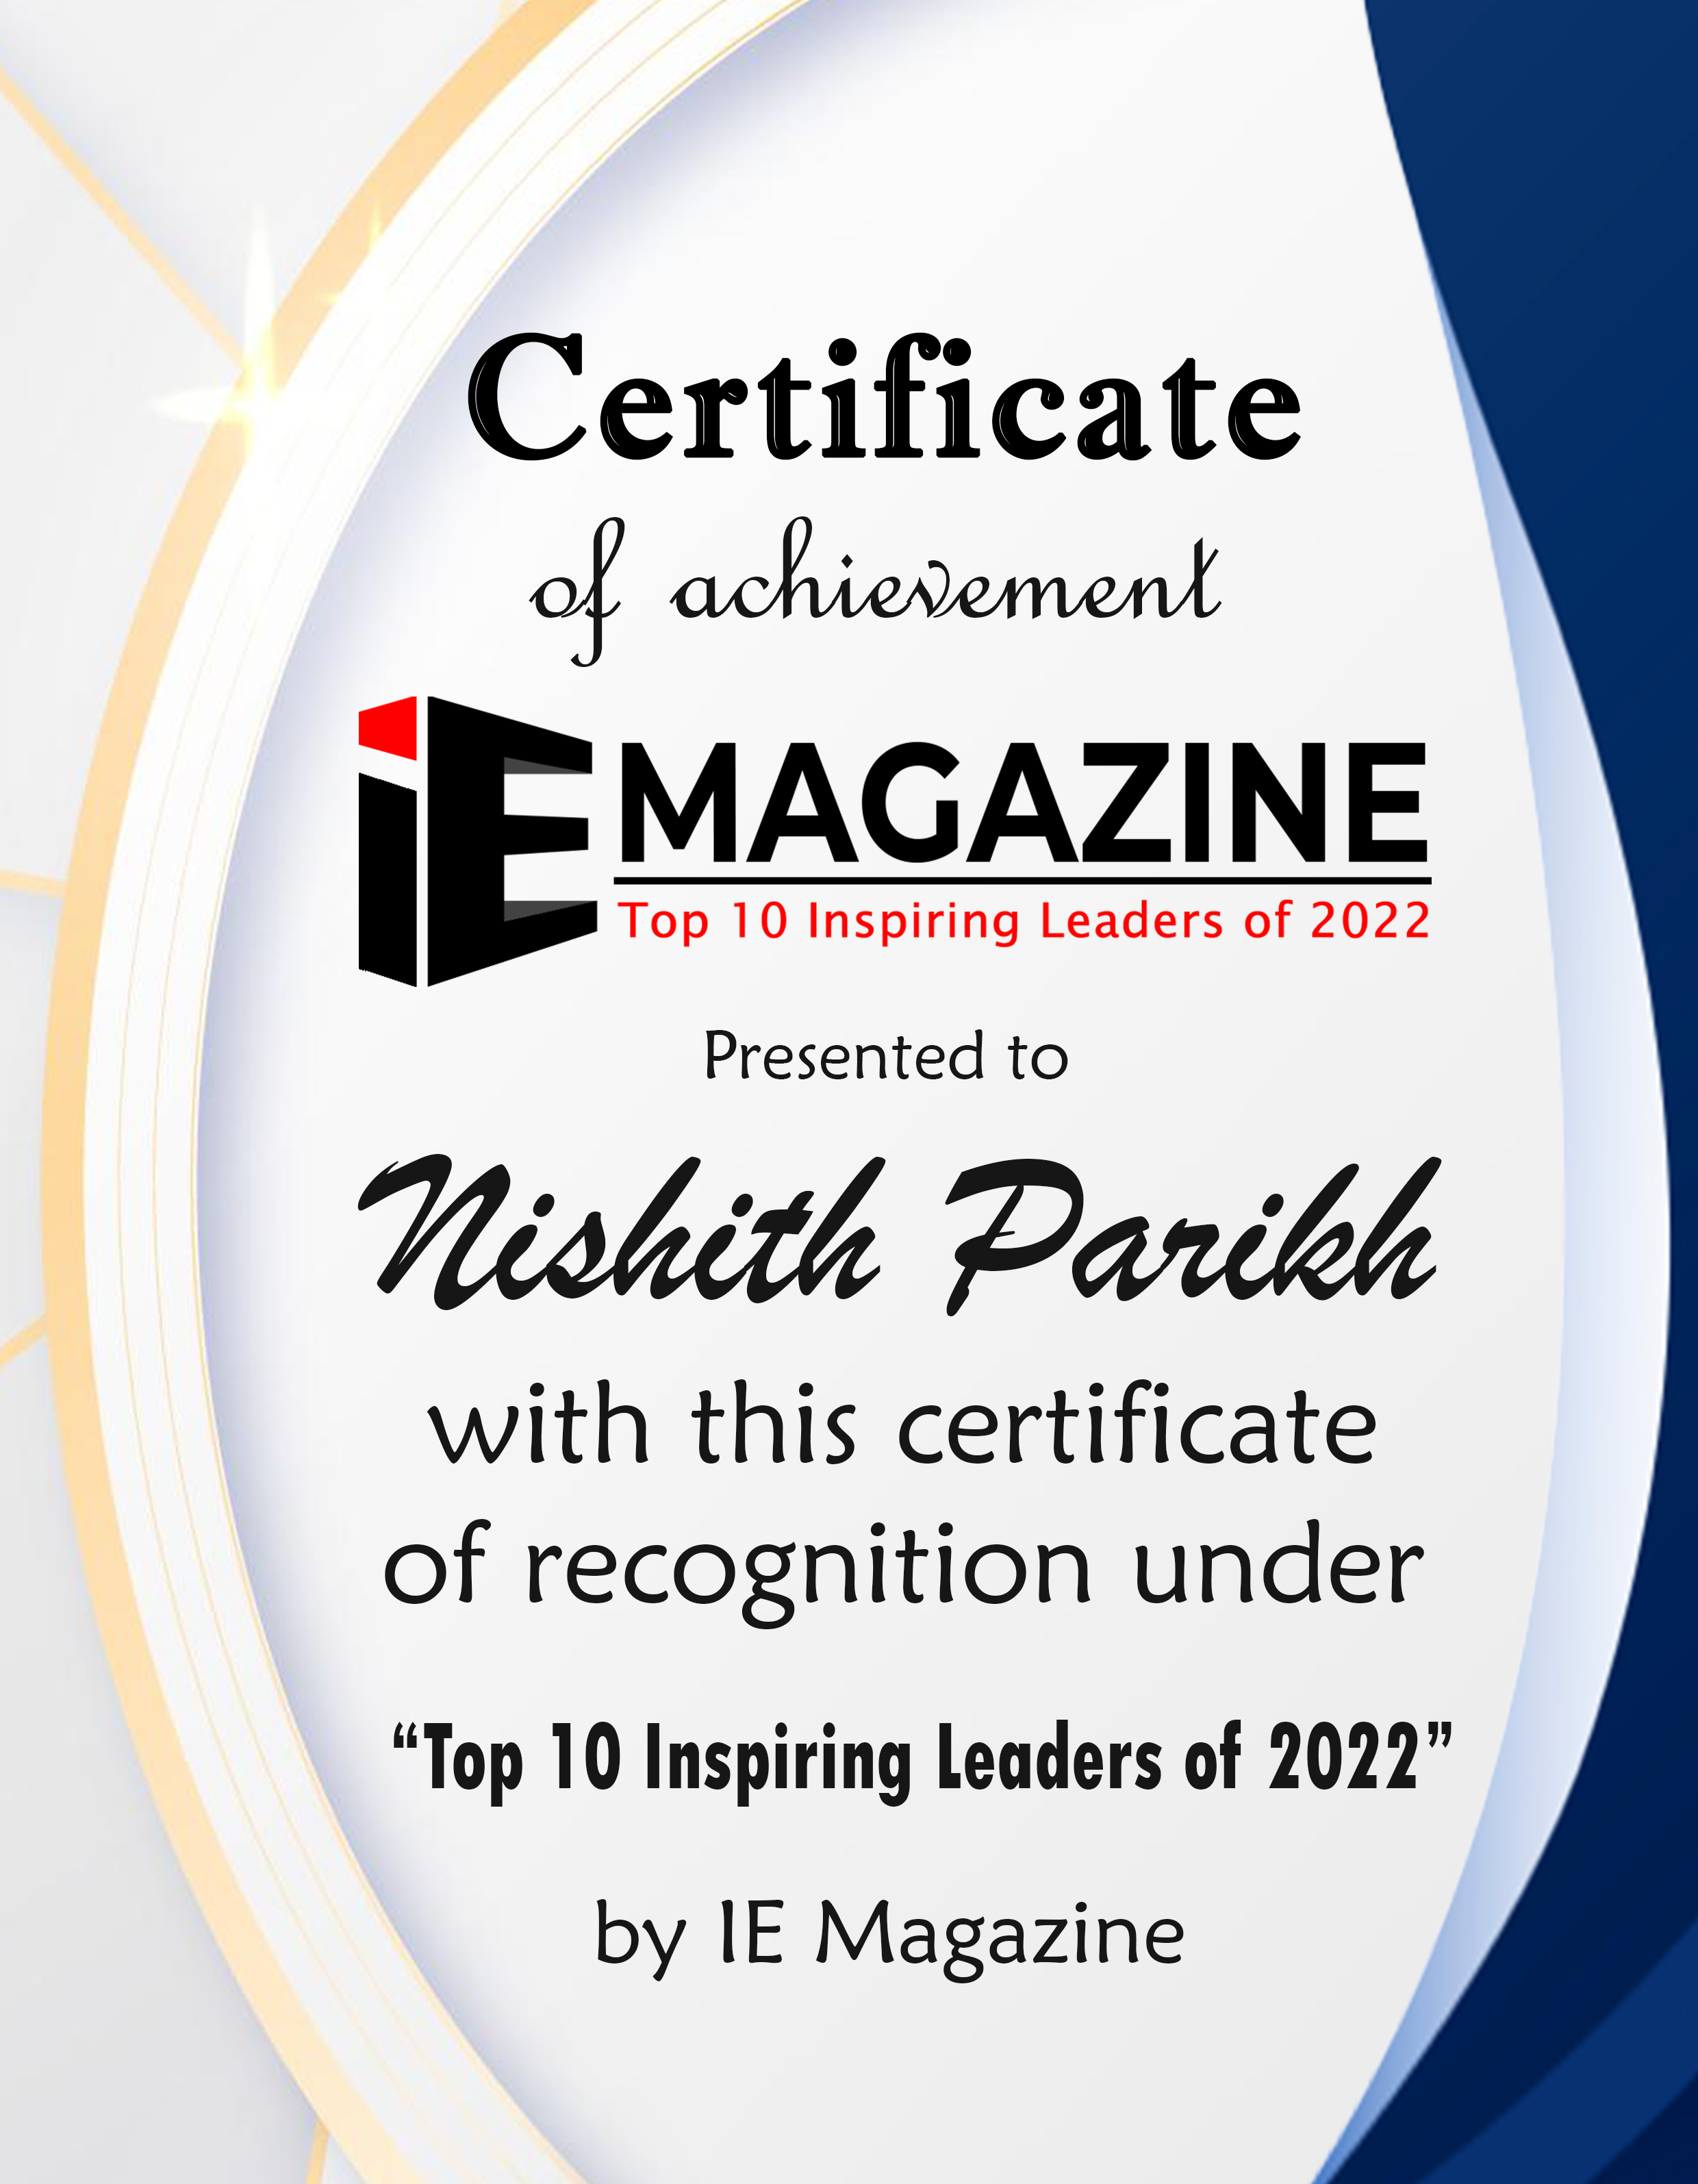 Nishith Parikh, Co-founder & CEO of Rangam Certificate